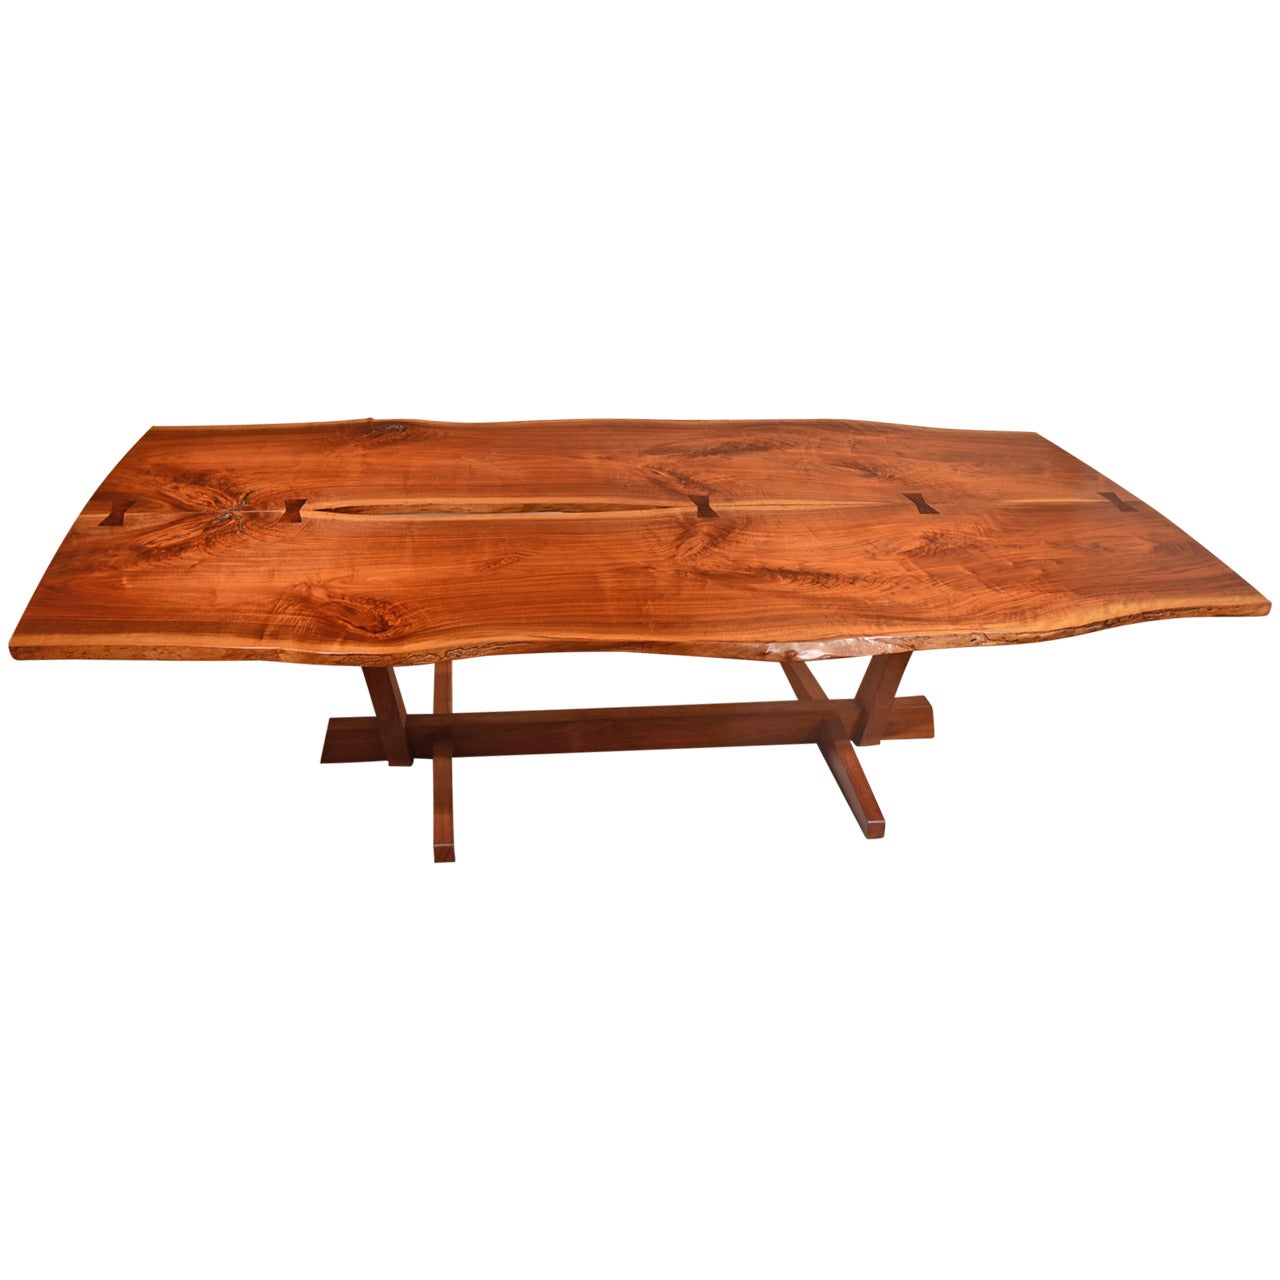 Rare Conoid Dining Table by George Nakashima, 1971